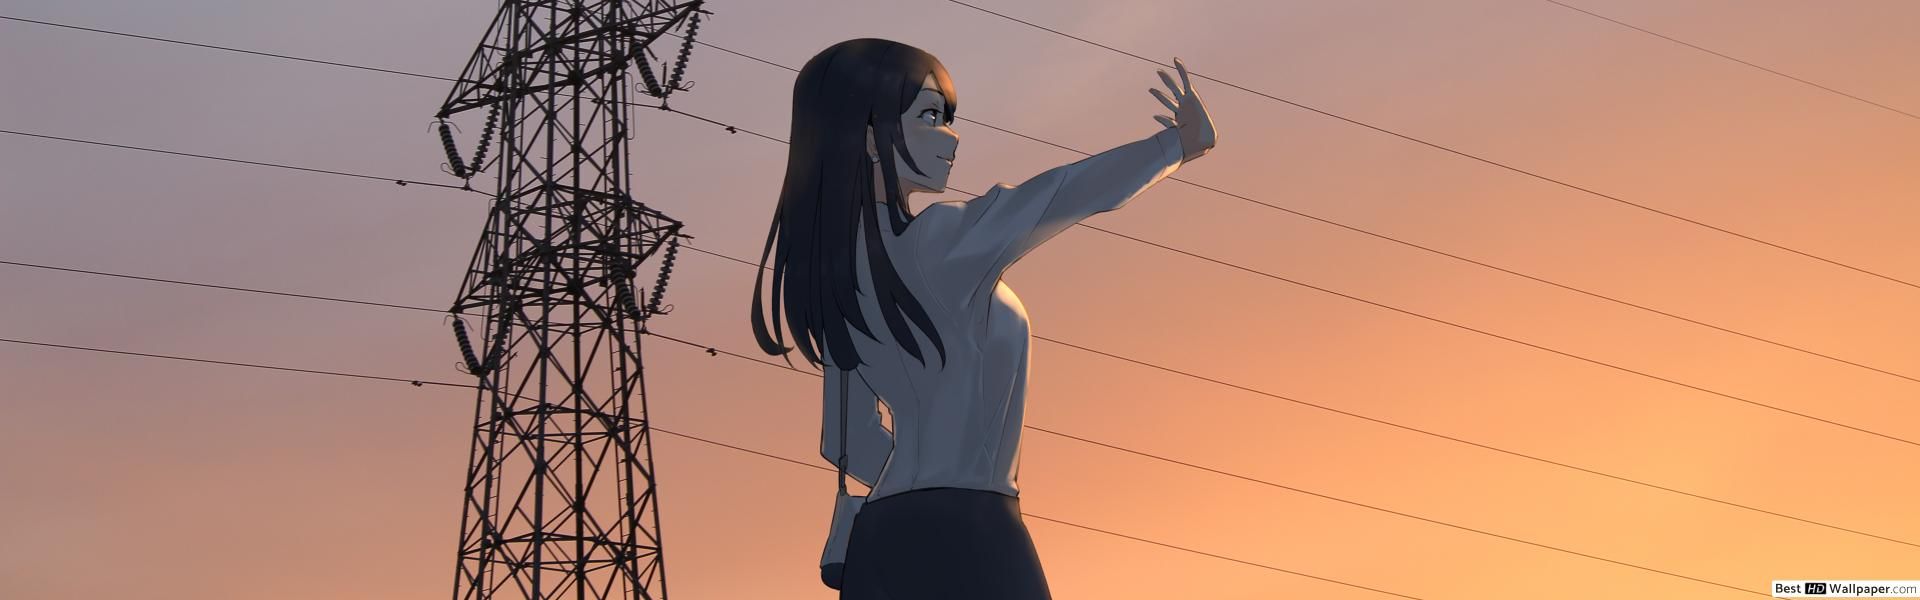 Anime girl shunned by sunset HD wallpaper download